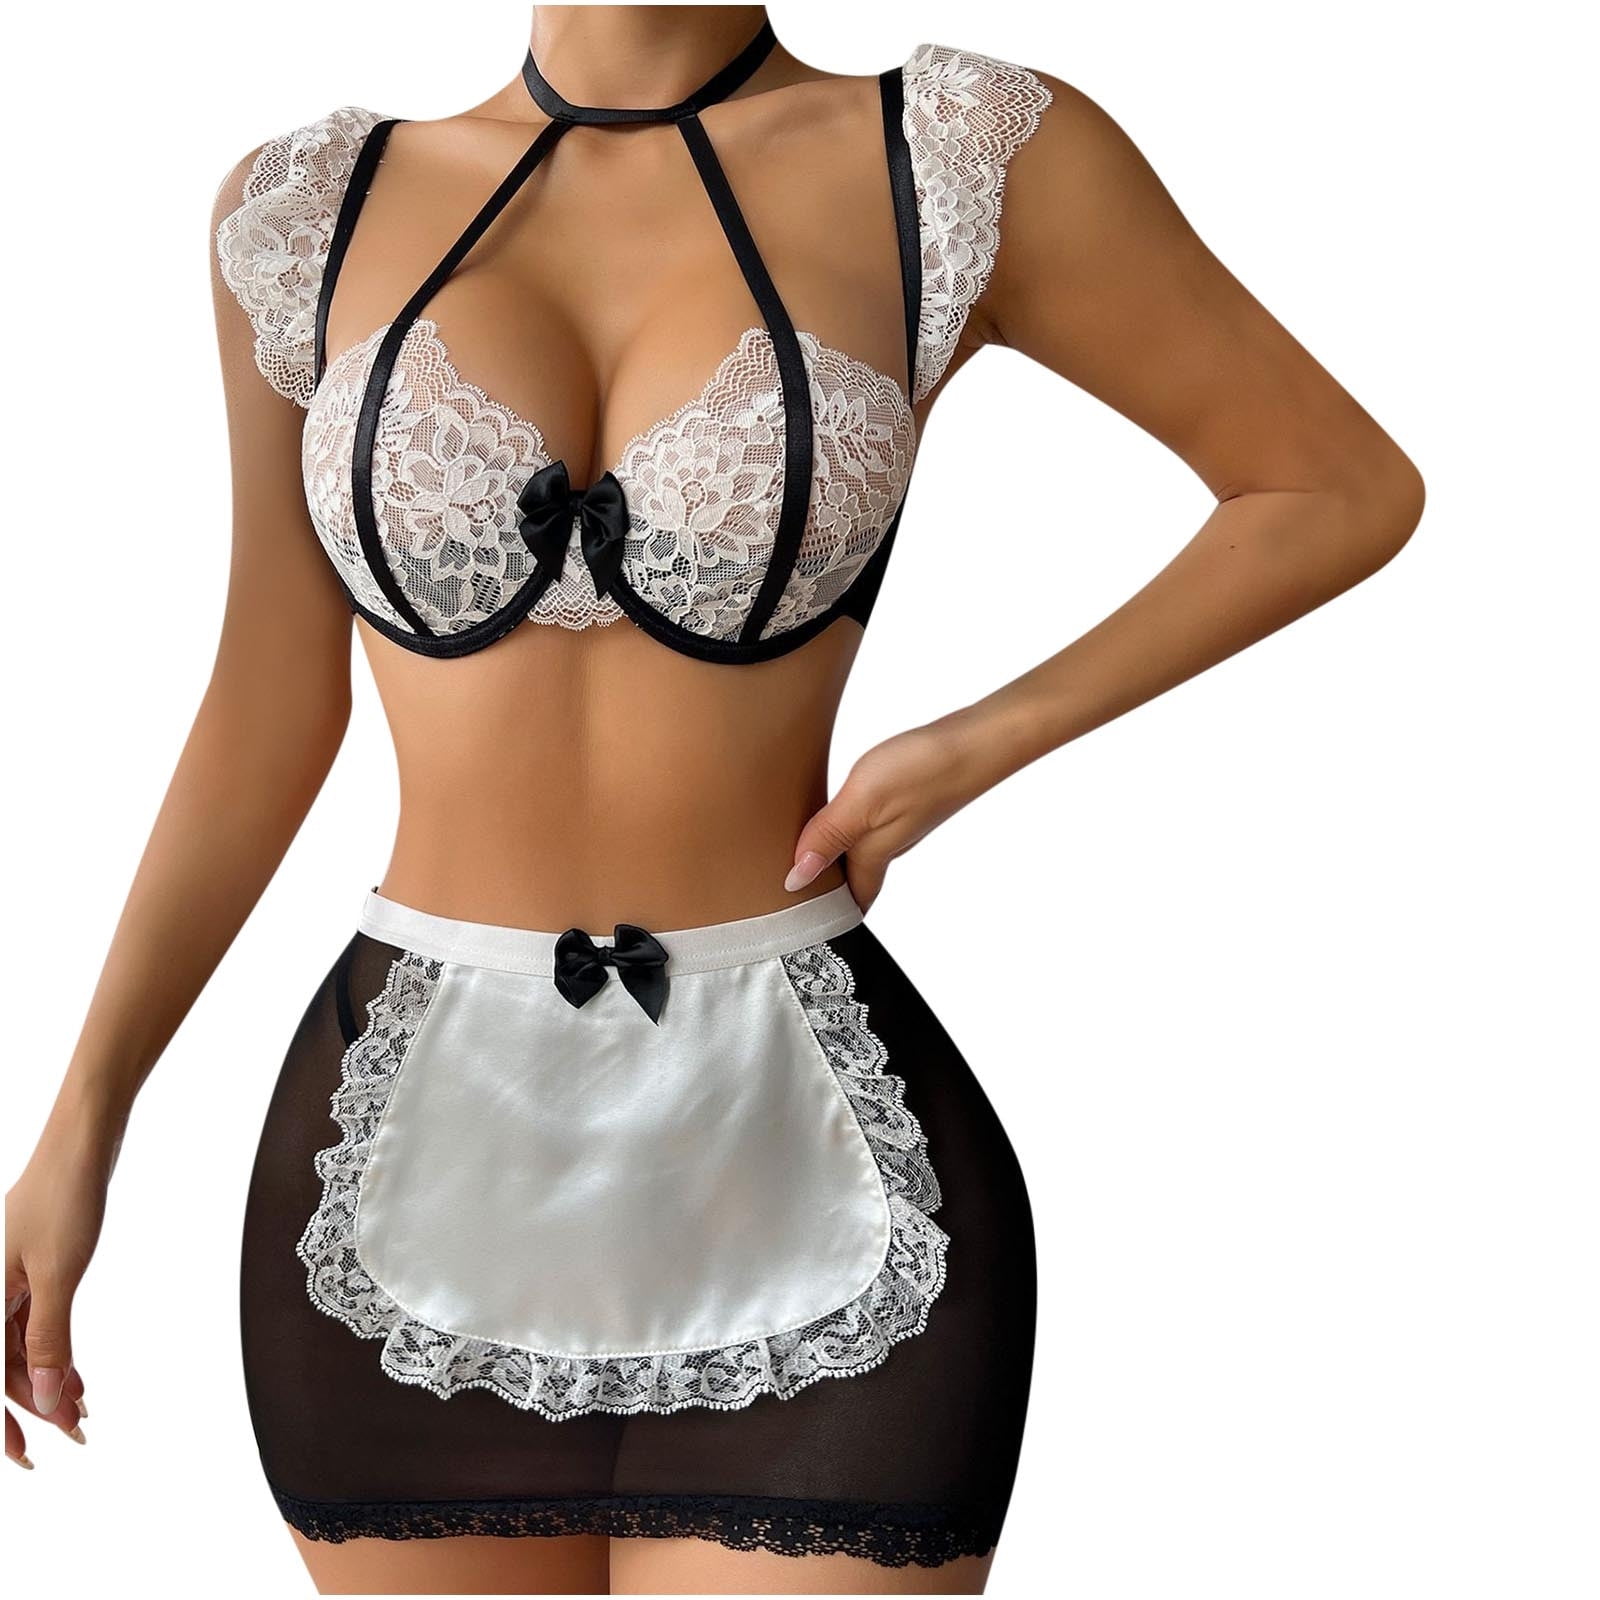 Maid Lace Panty Collection